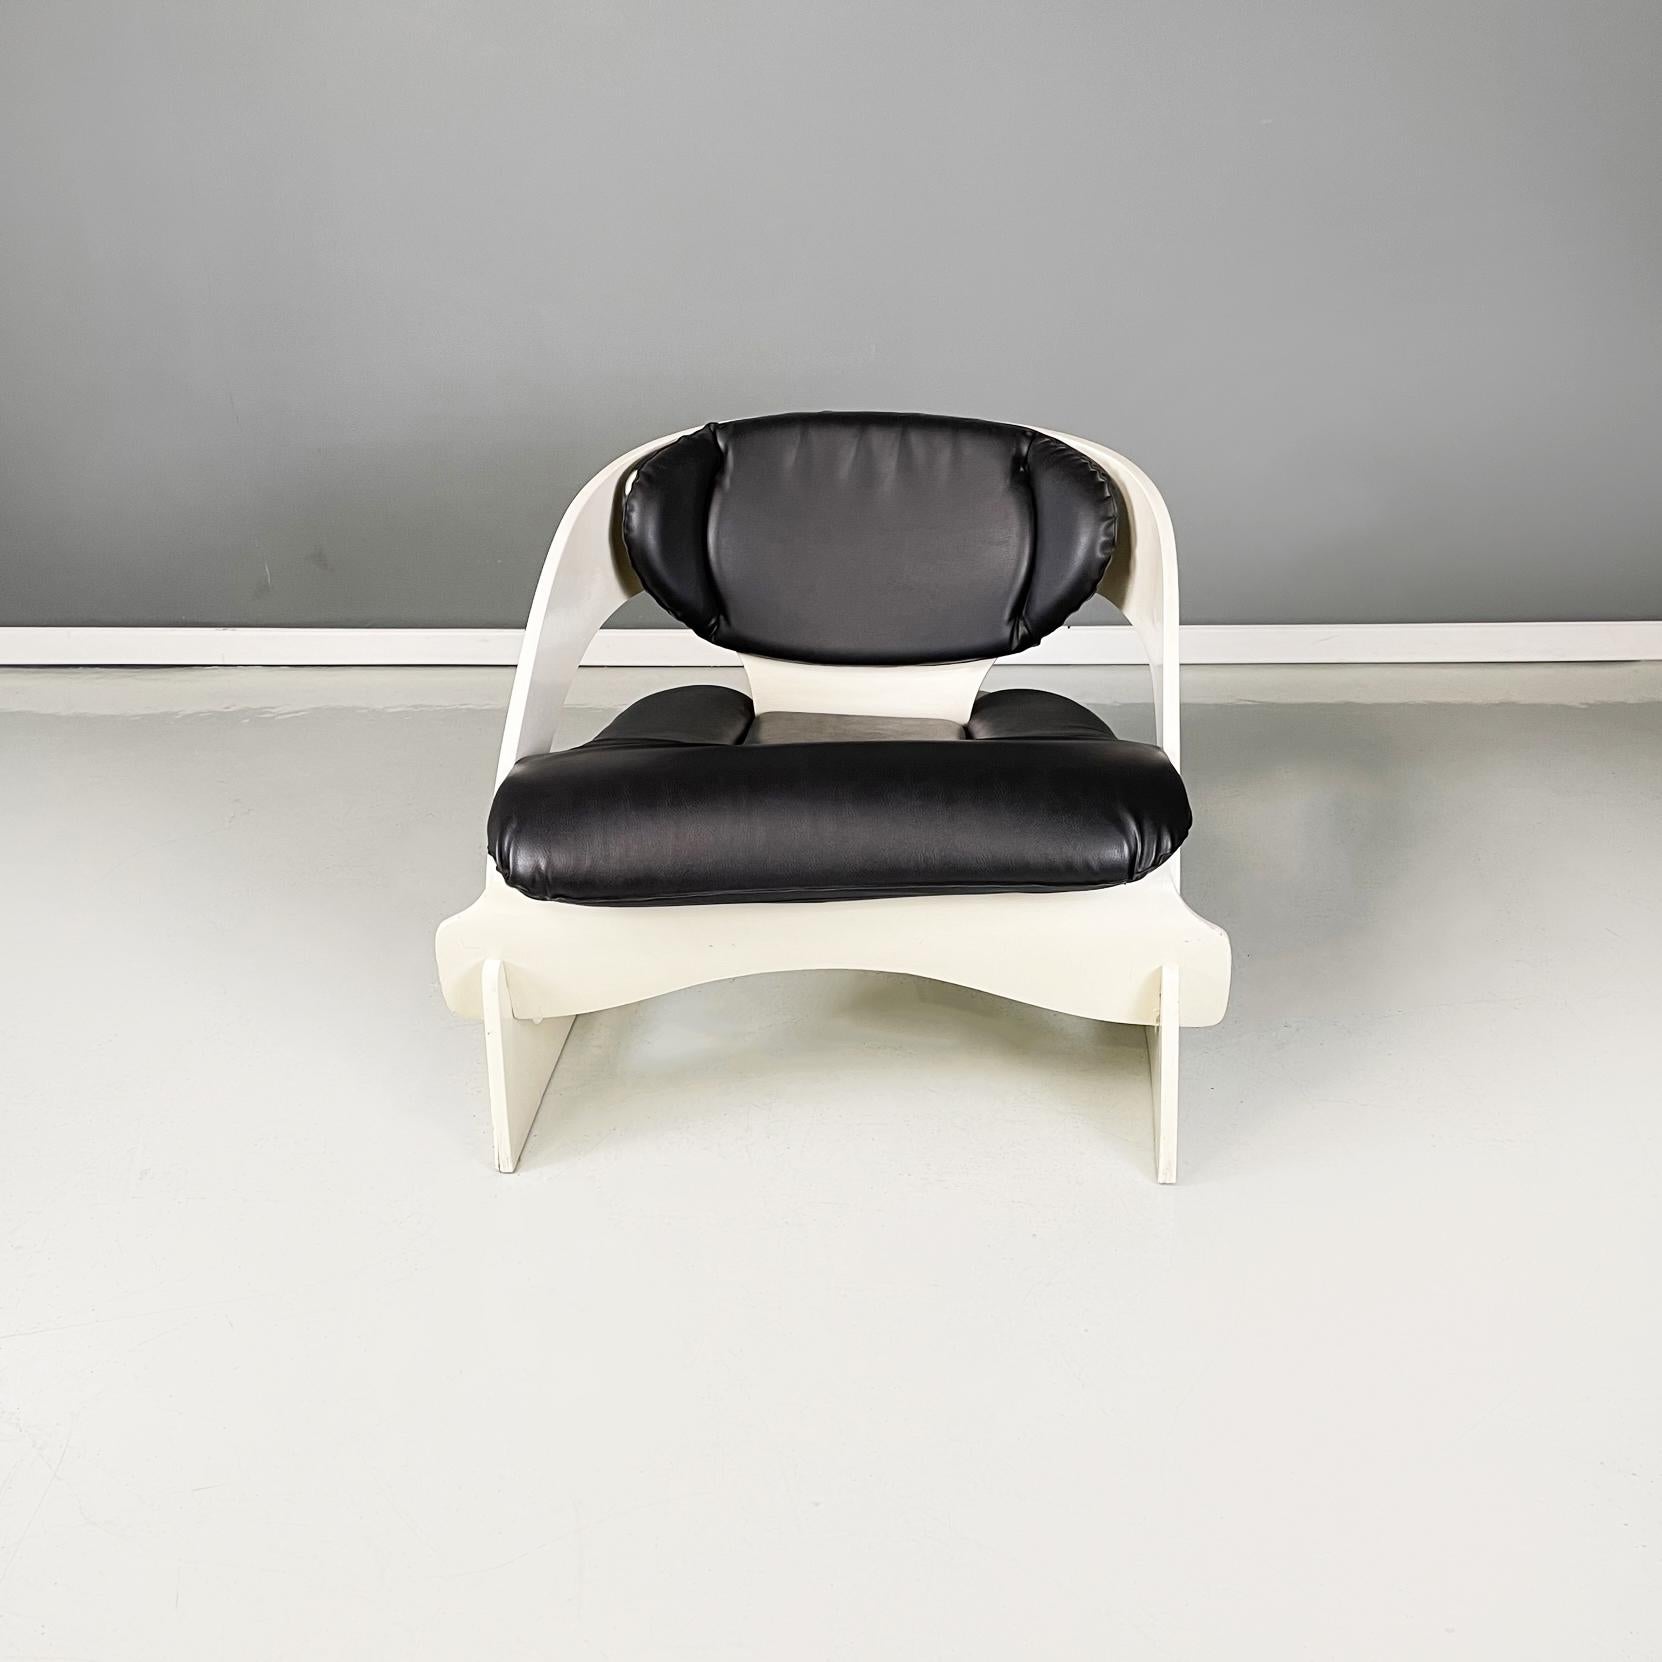 Italian modern white wood Armchair mod. 4801 by Joe Colombo for Kartell, 1970s
Armchair mod. 4801 with structure made up of different interlocking parts, in white painted wood. The semi-oval seat and the oval backrest are padded and covered in